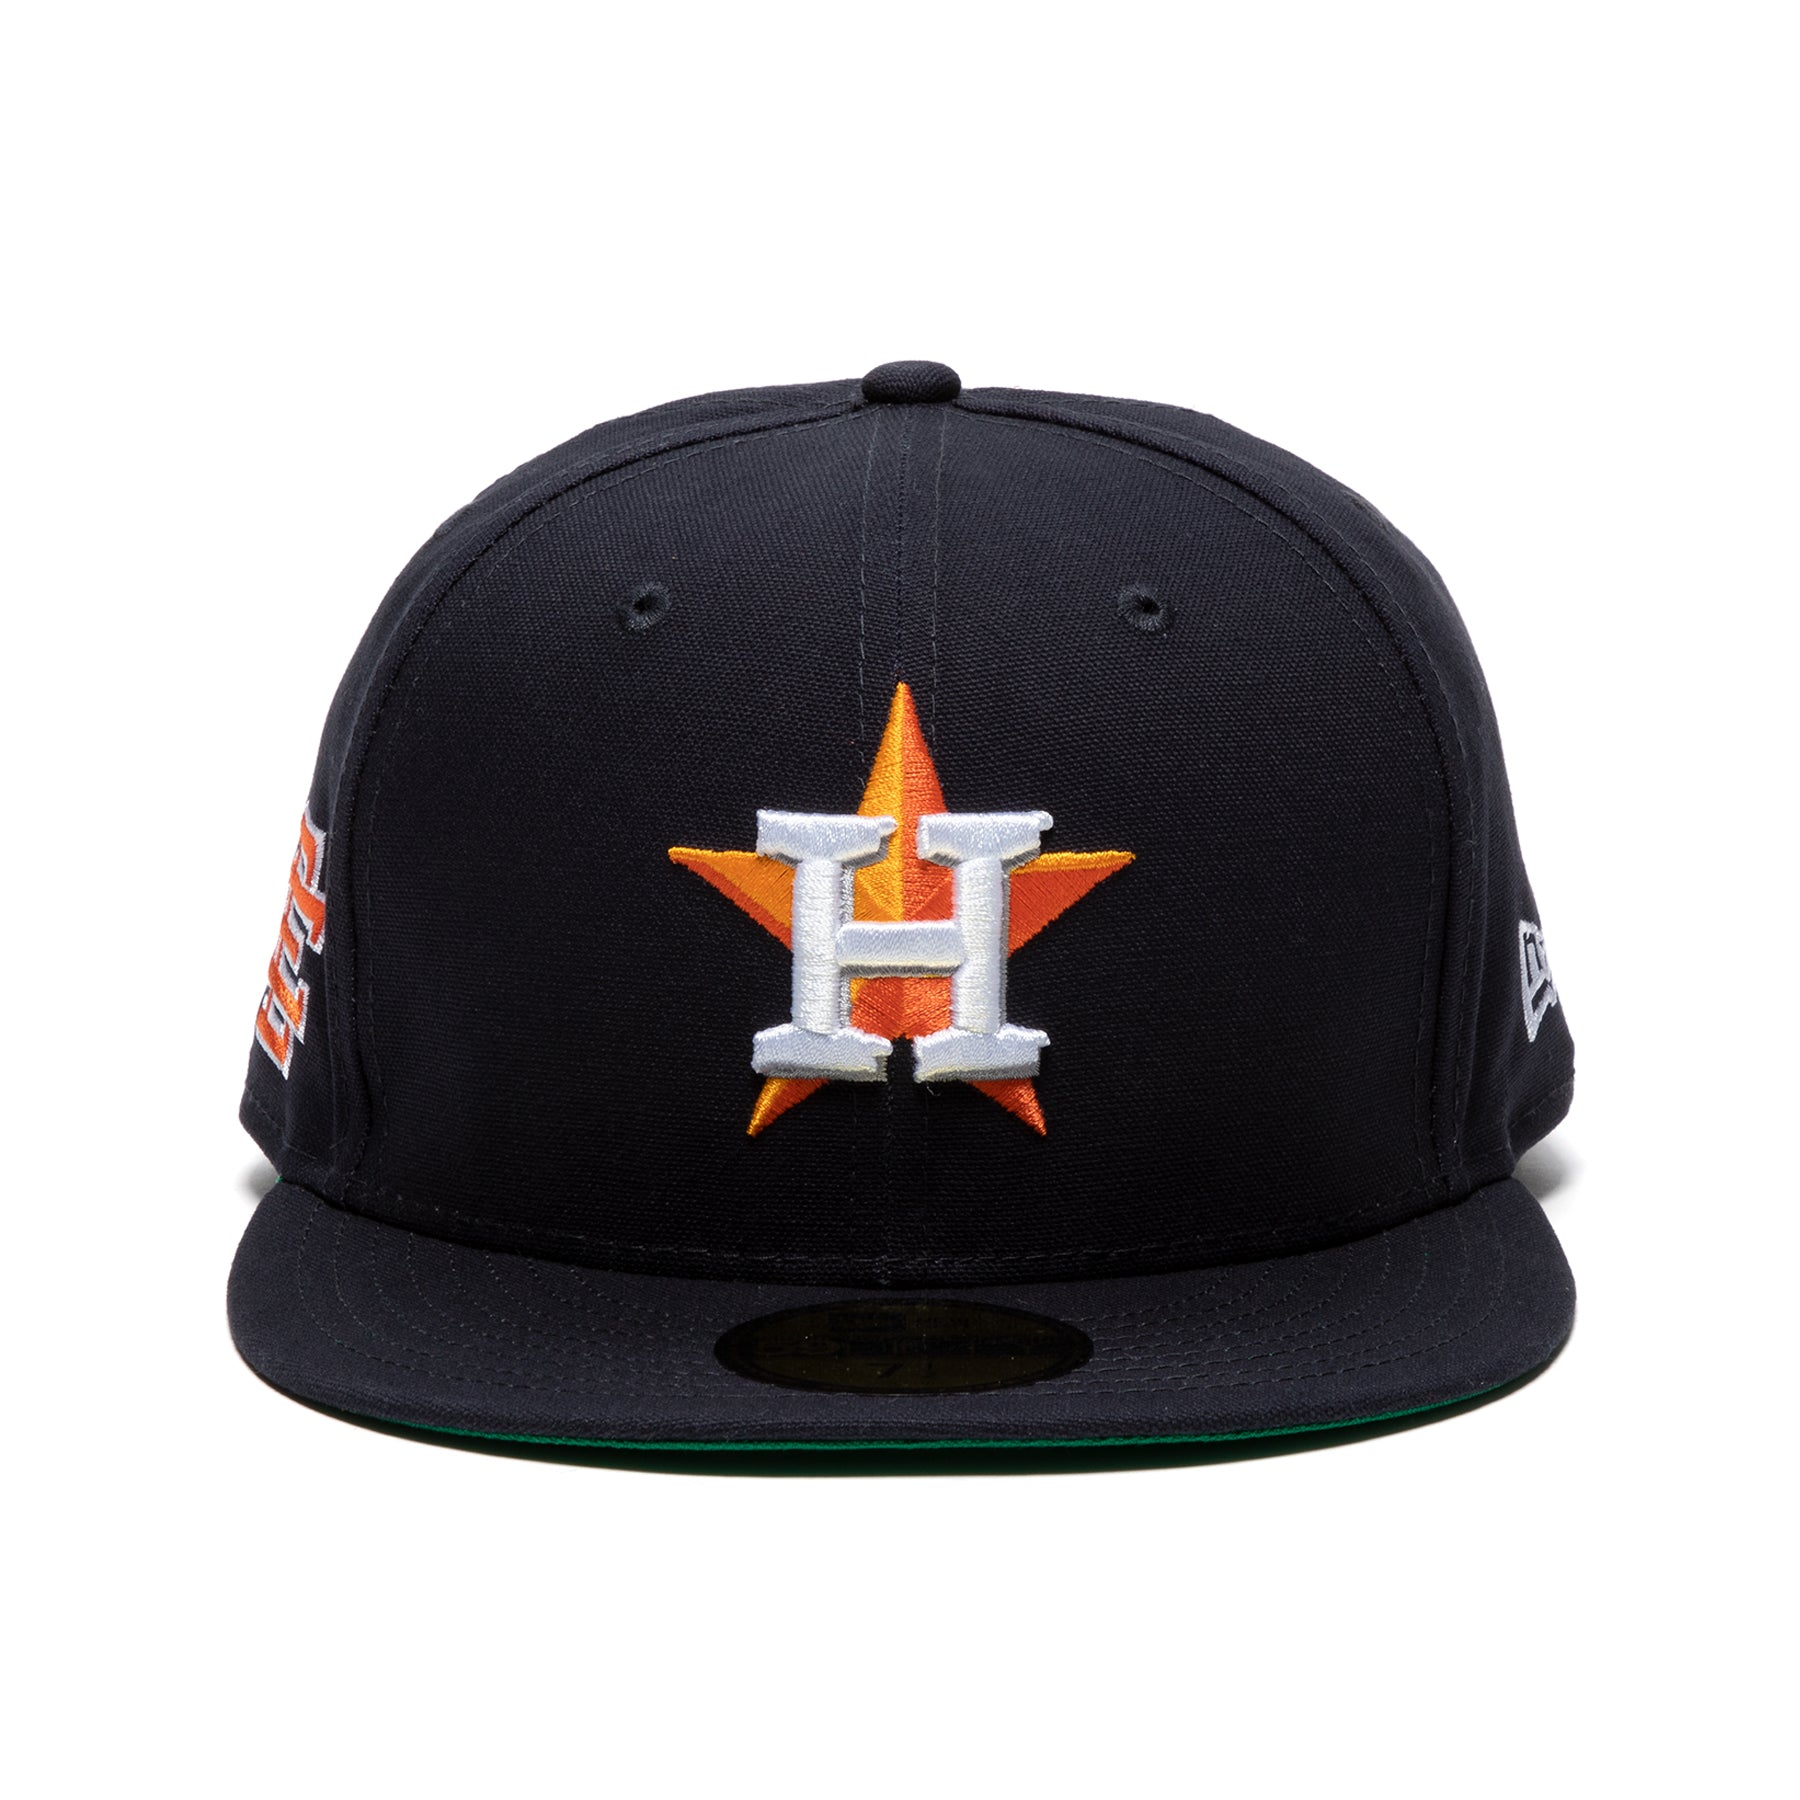 NEW ERA 59FIFTY Houston Astros Space City Fitted Hat Size 7 3/8 Pink UV